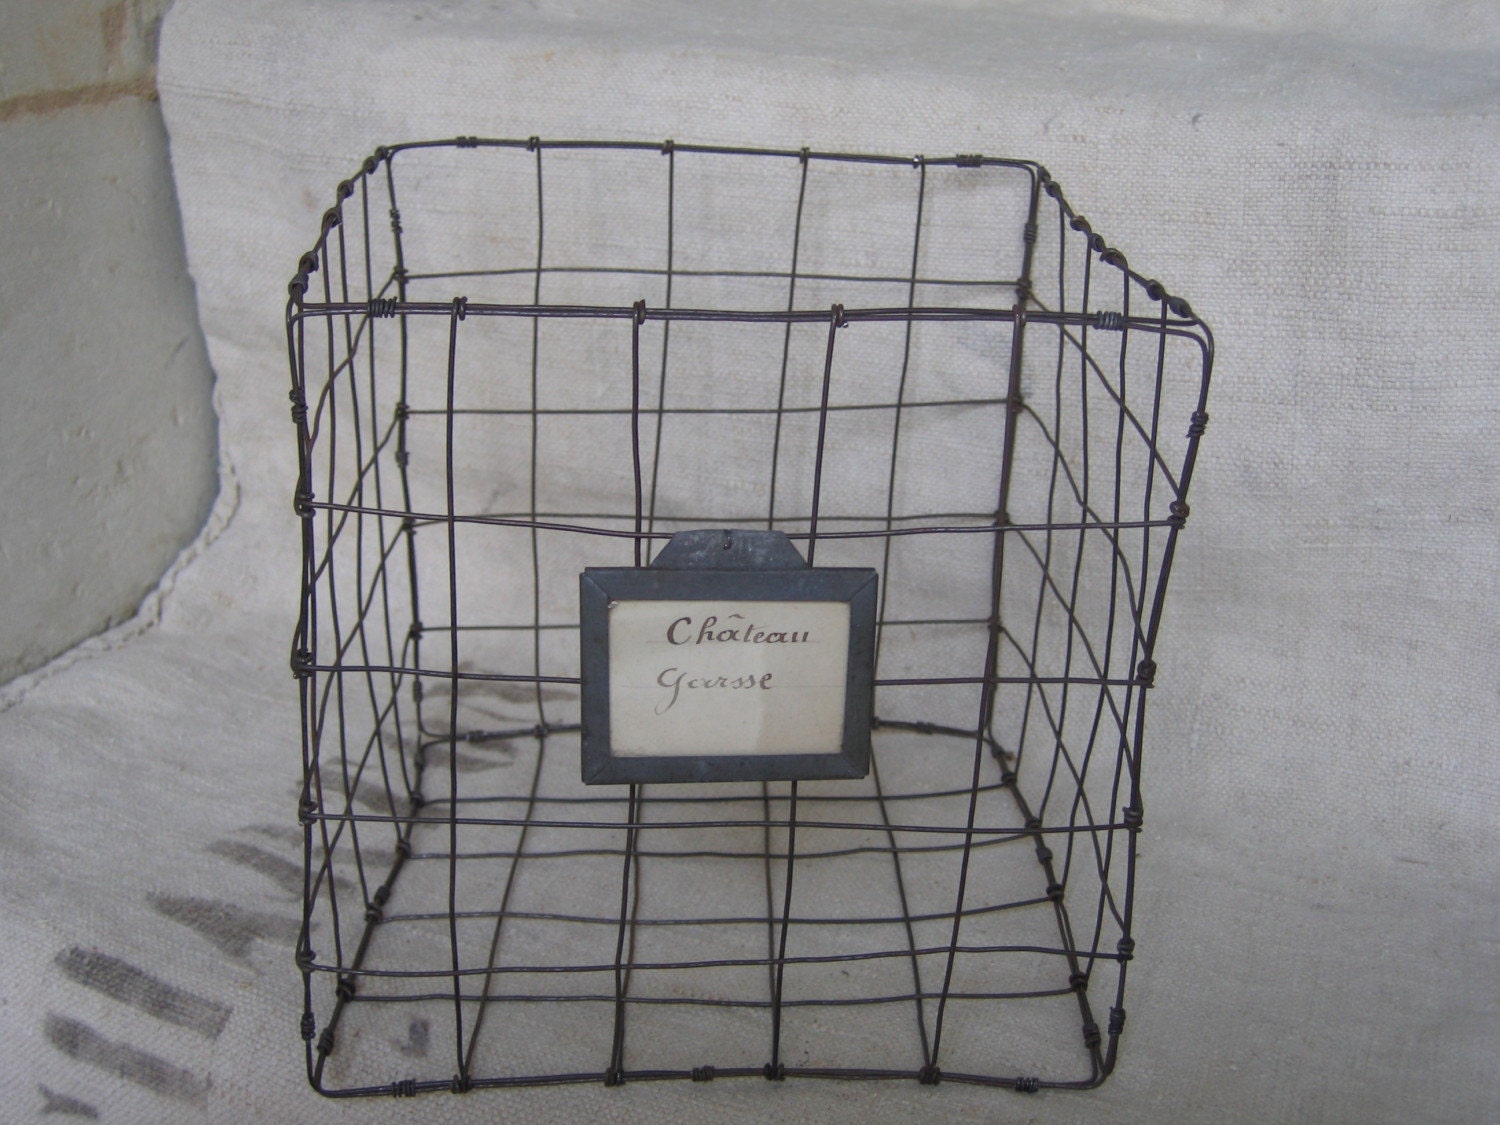 WIRE BASKET with vintage zinc label of wine cave